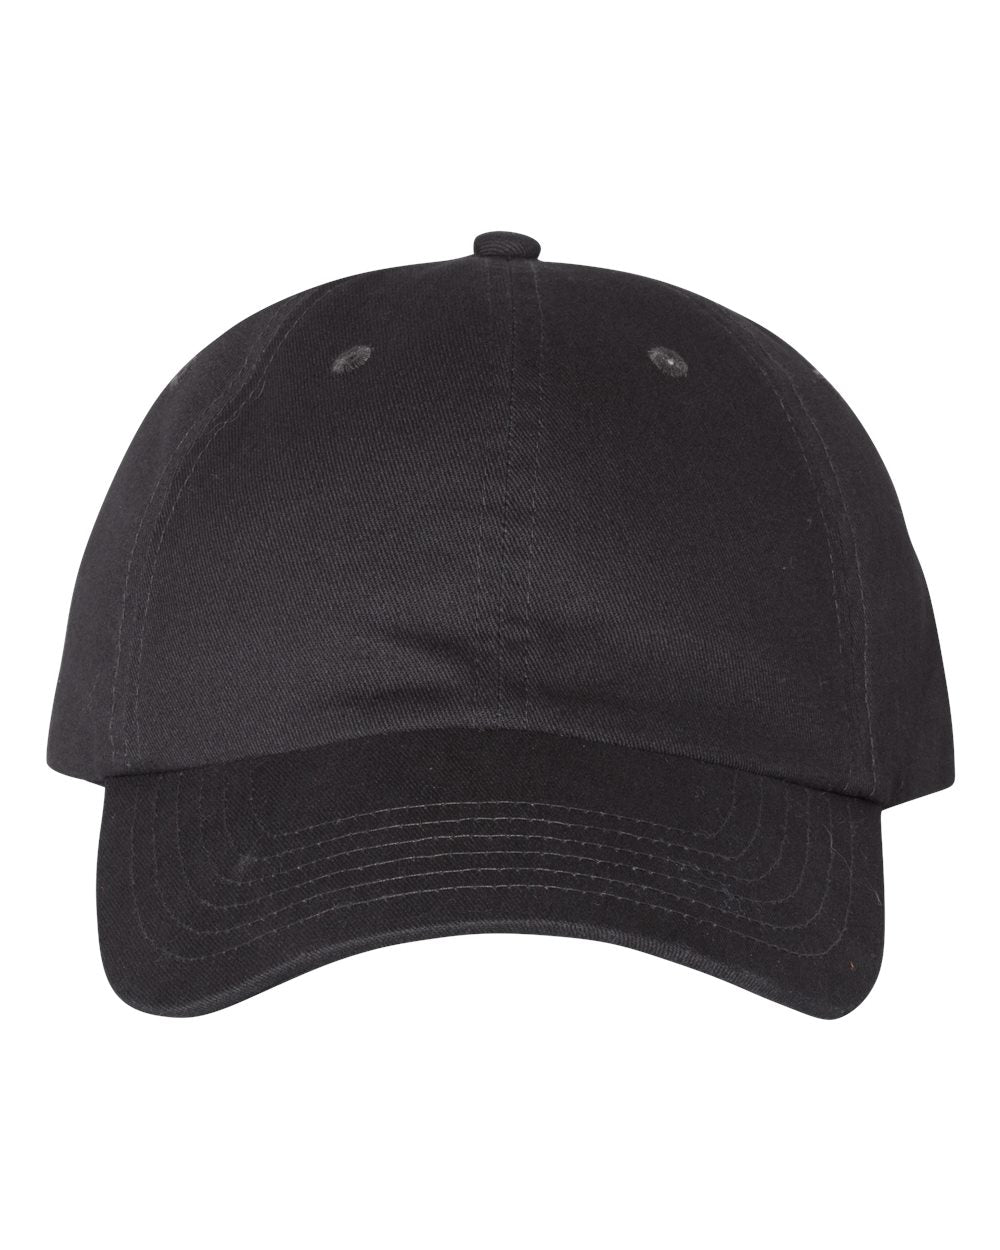 Adult Brushed Twill Cap, Charcoal